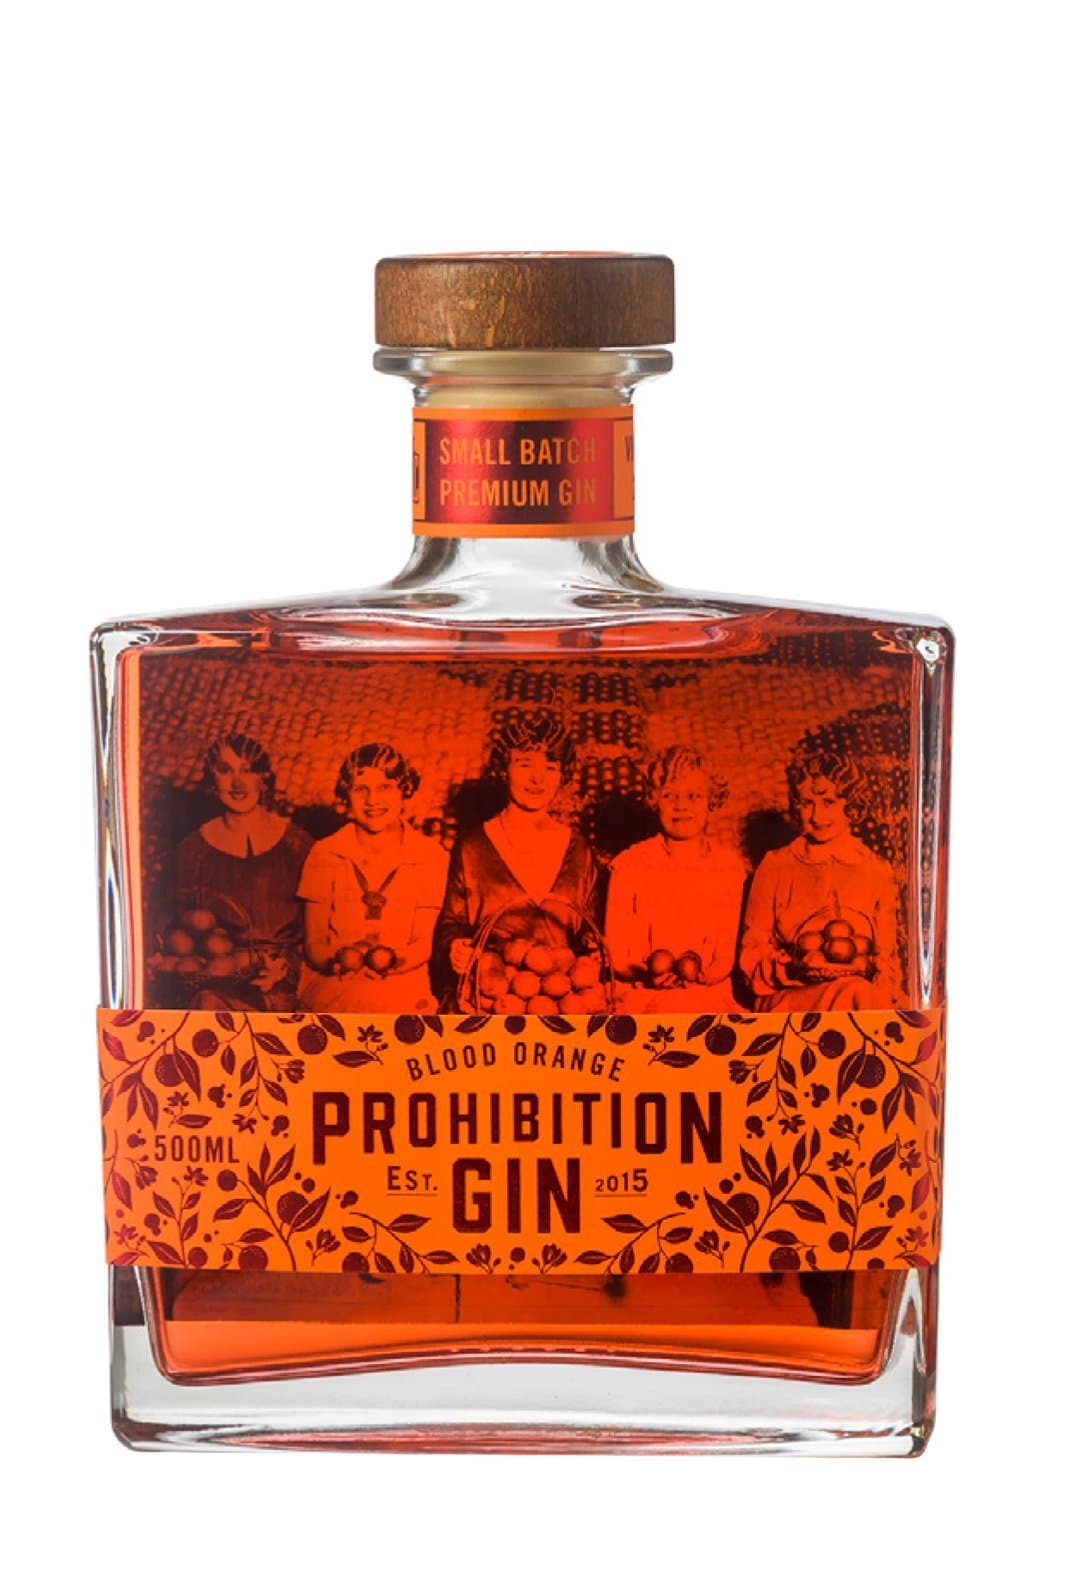 Prohibition Limited Release Blood Orange gin 44% 500ml | Gin | Shop online at Spirits of France